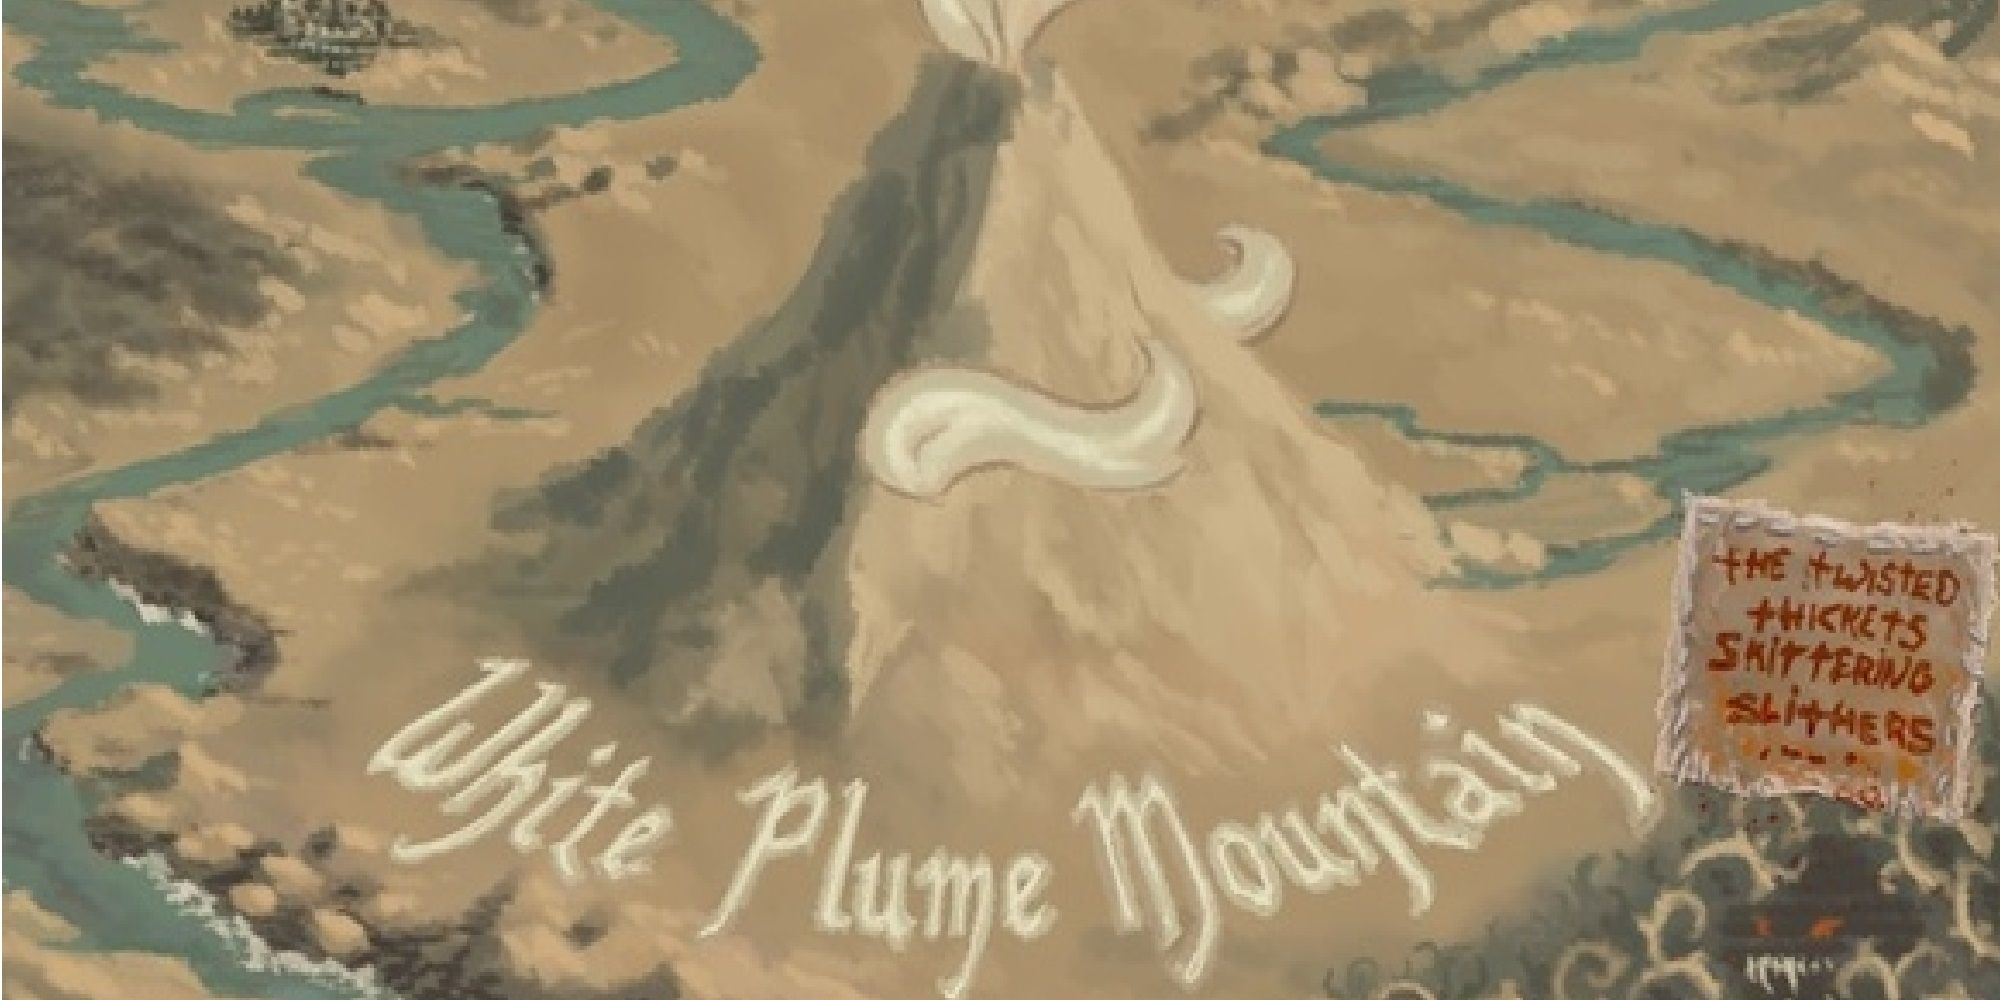 The cover of the White Plume Mountain campaign module for D&D